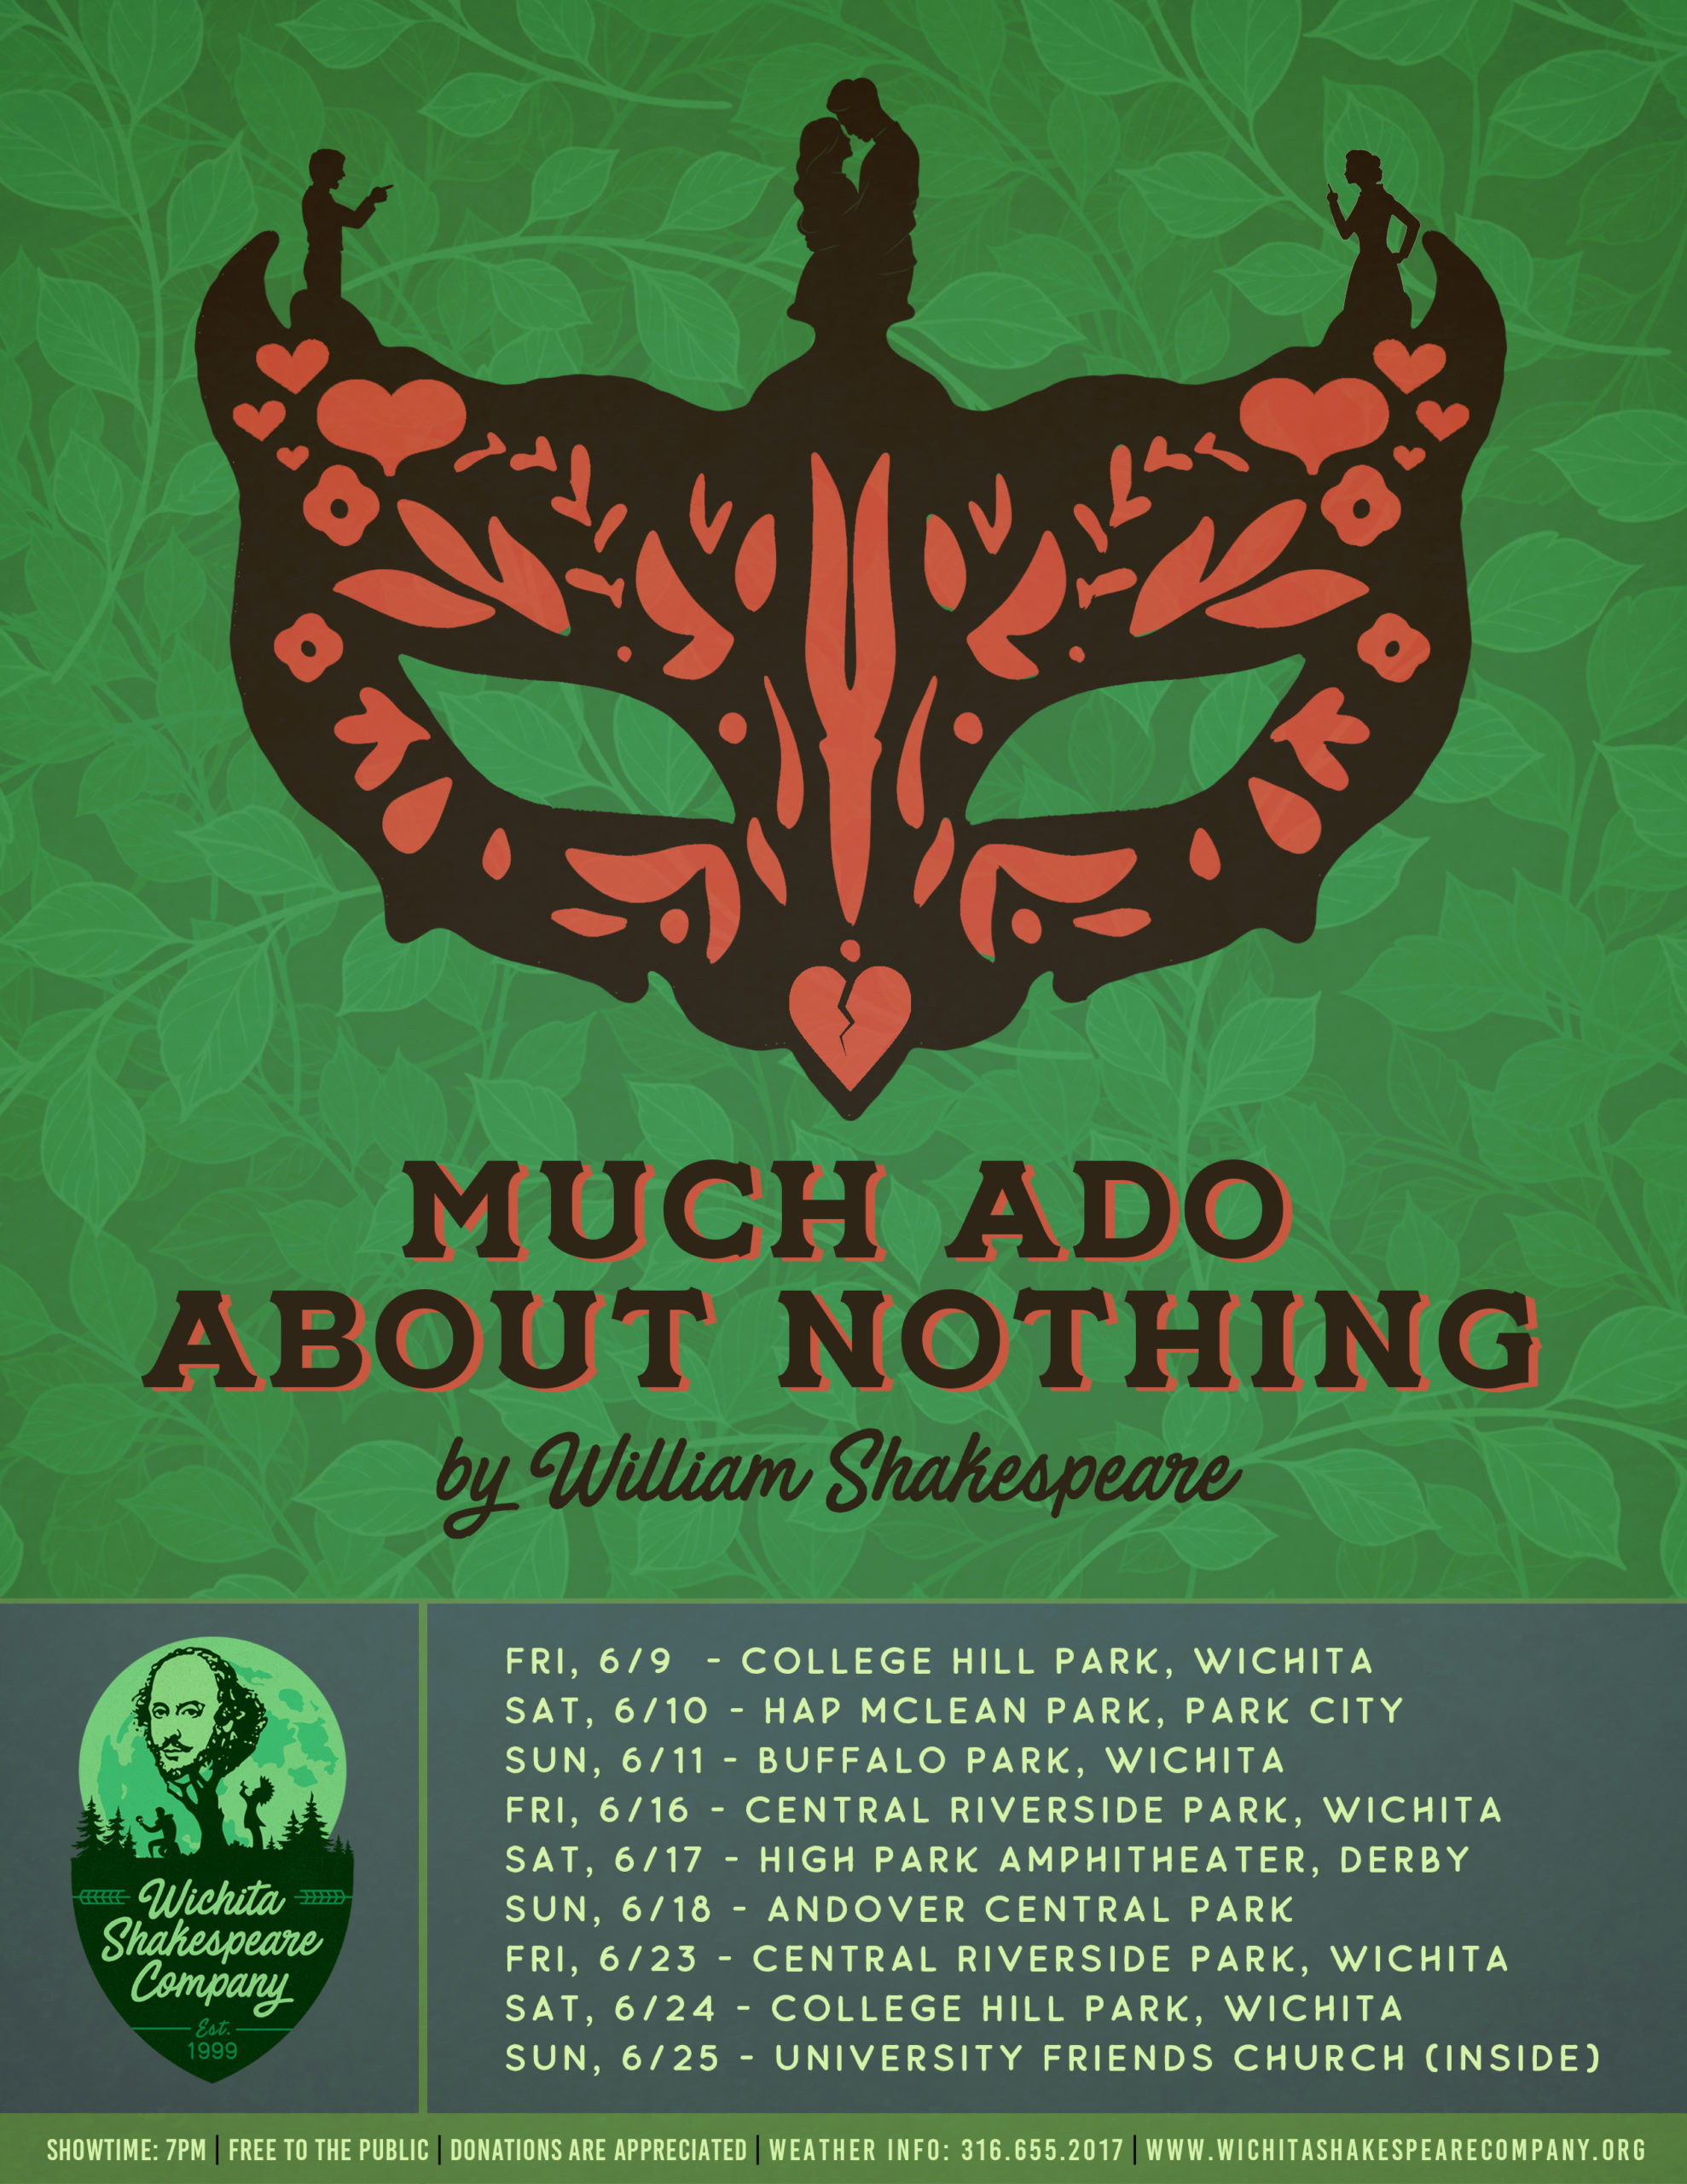 Wichita Shakespeare Company Presents Much Ado About Nothing